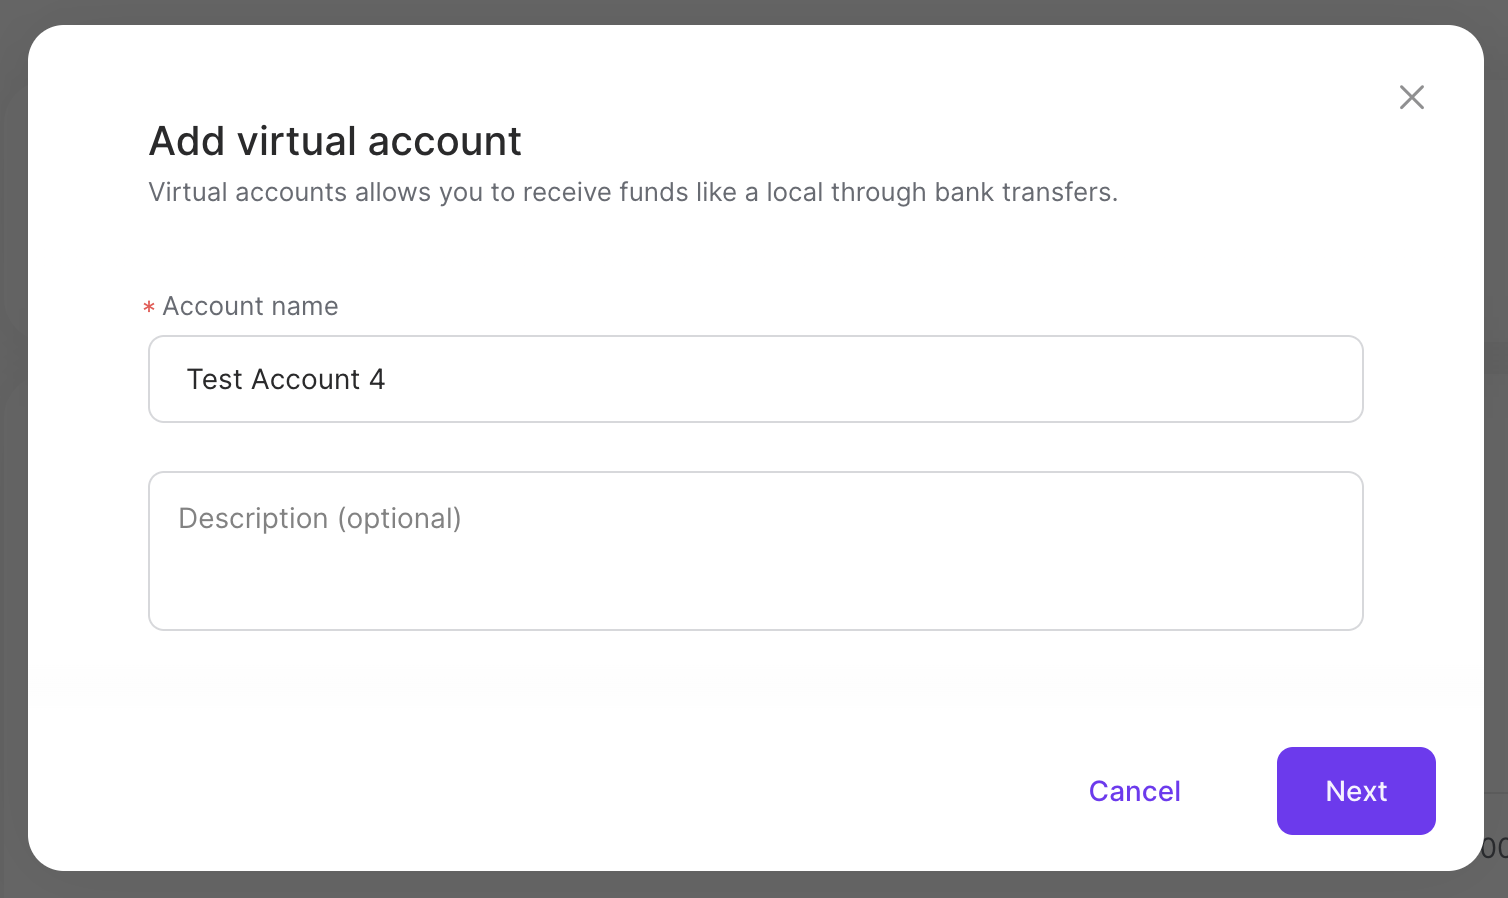 create-virtual-account-flow-3.png